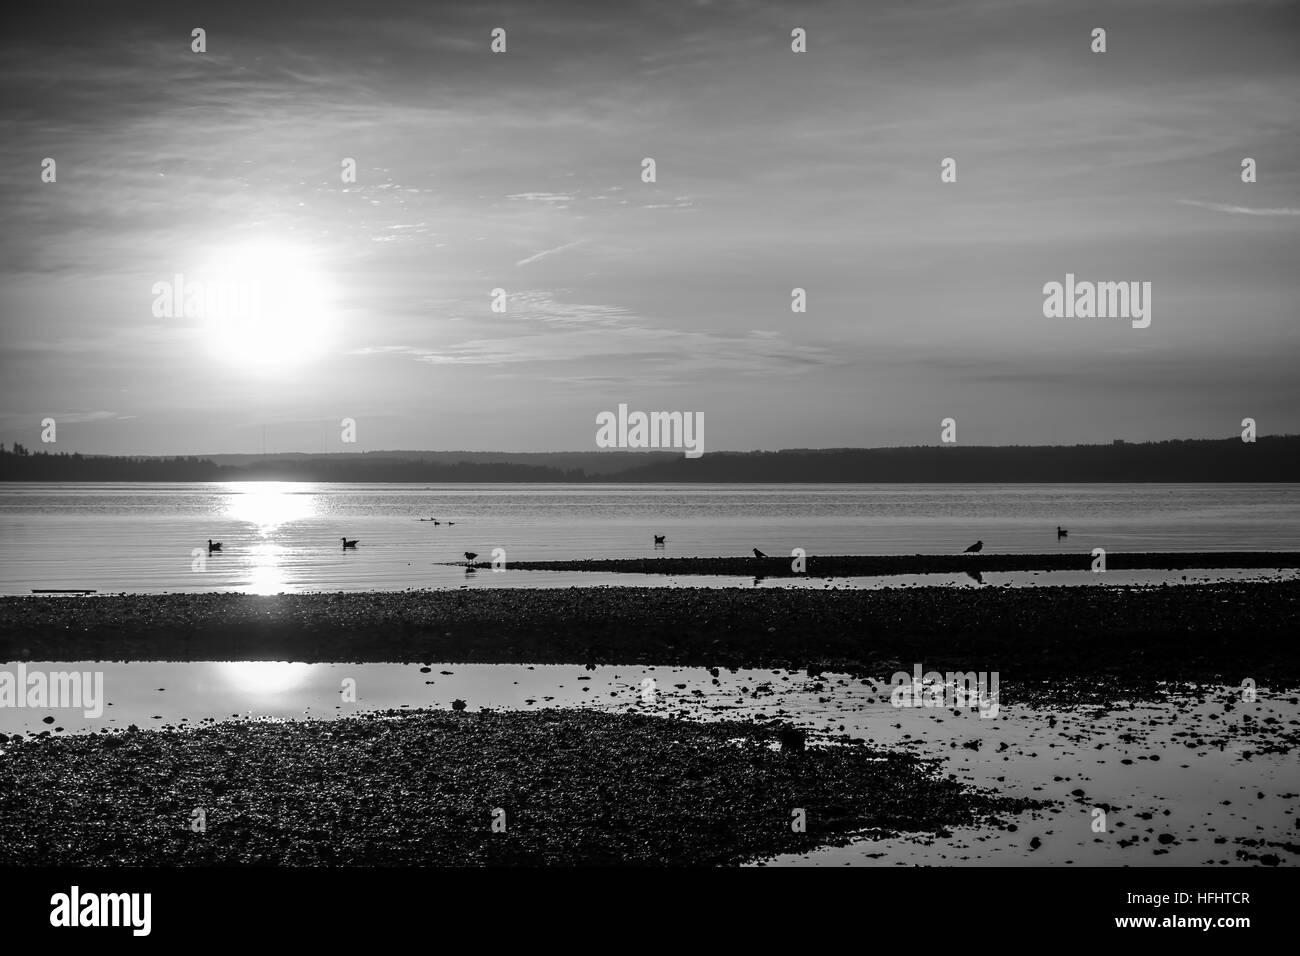 Luminous light envelops everything as the sun sets over the Puget Sound. Black and white image. Stock Photo